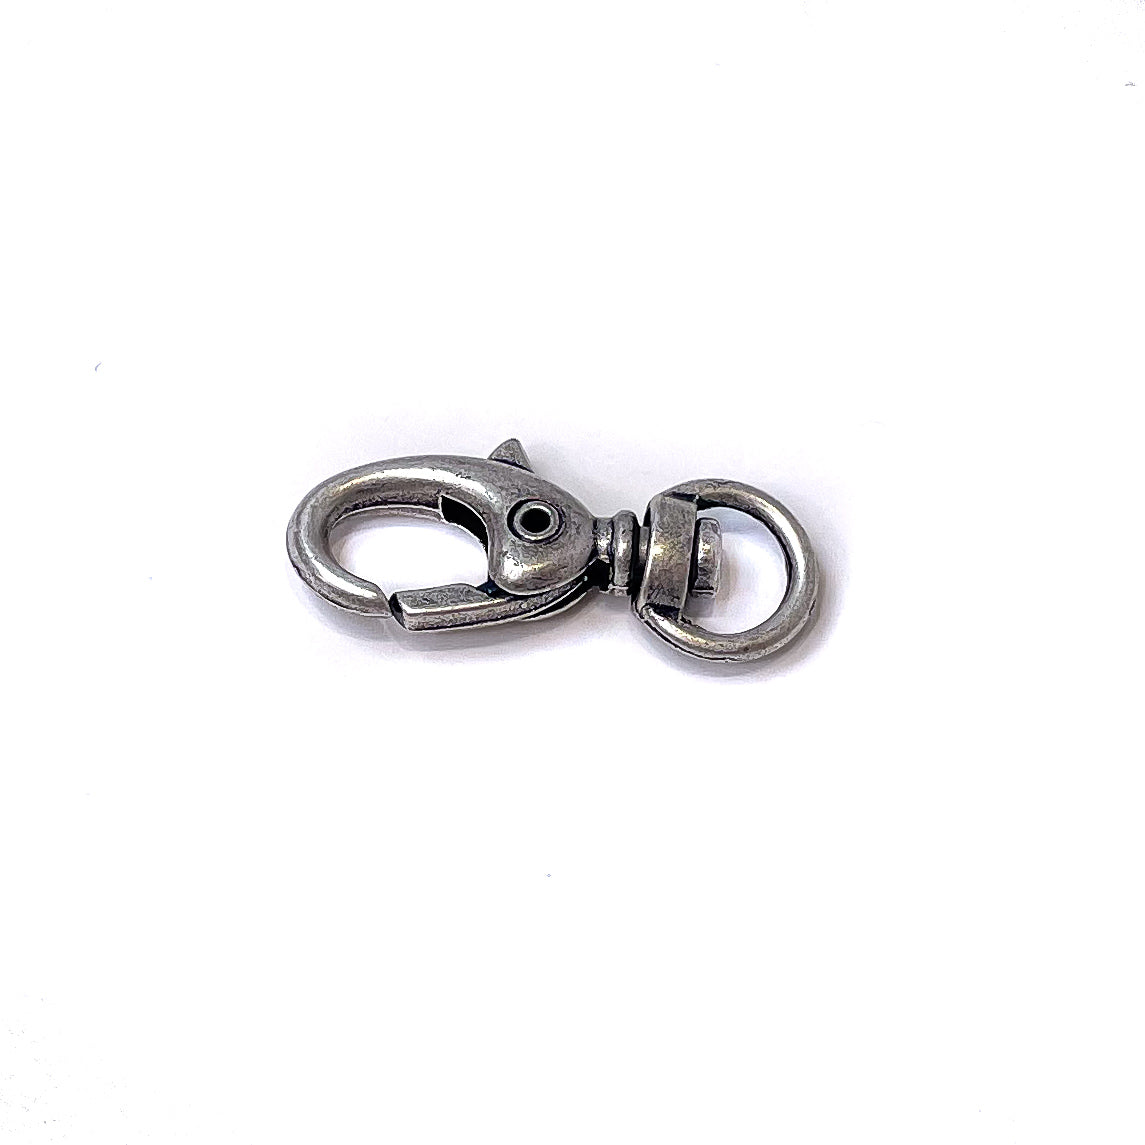 30mm x 15mm Swivel Lobster Clasp (4 Colors Available) - 1 pc.